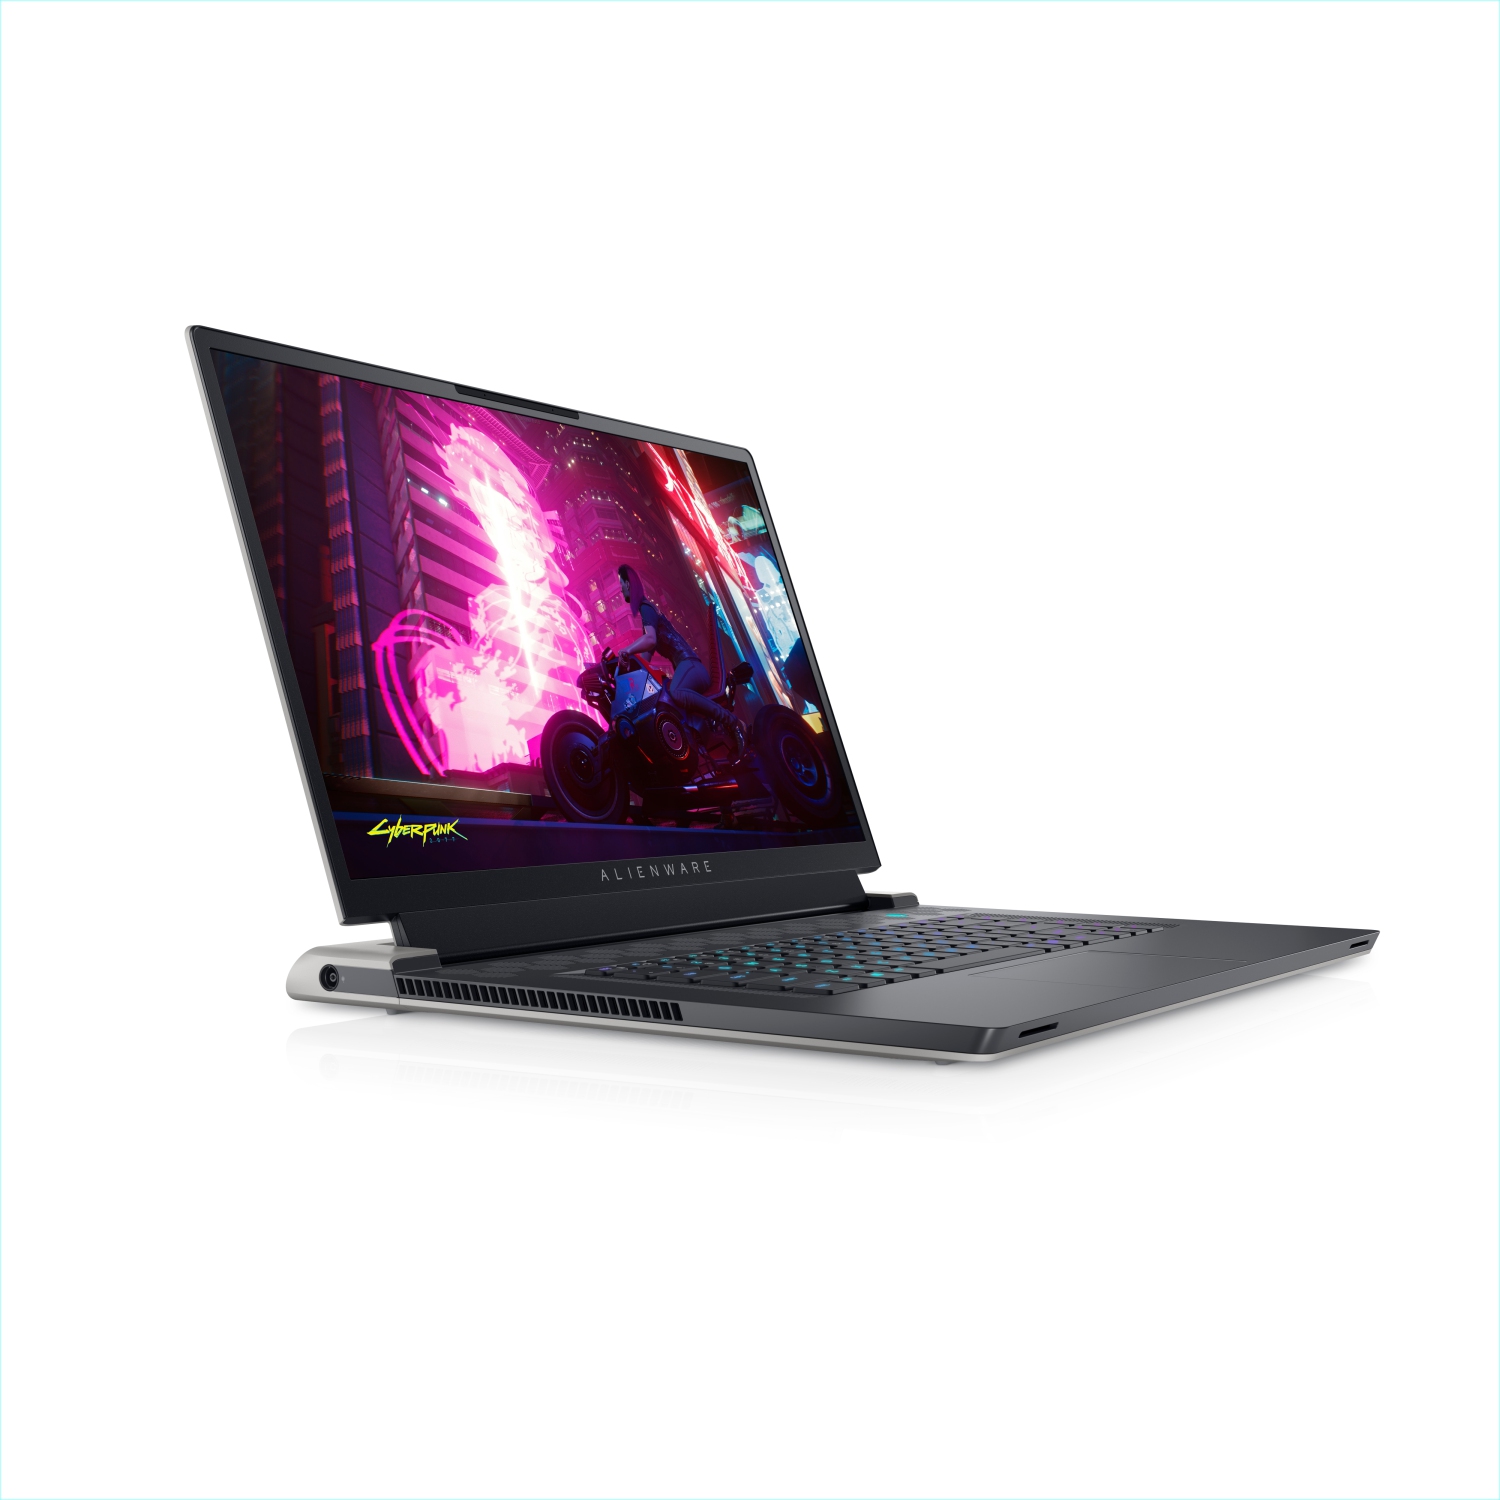 Refurbished (Excellent) - Dell Alienware X17 R1 Gaming Laptop (2021), 17.3" FHD, Core i9, 2TB SSD + 2TB SSD, 64GB RAM, RTX 3080, 5 GHz, 11th Gen CPU Certified Refurbished